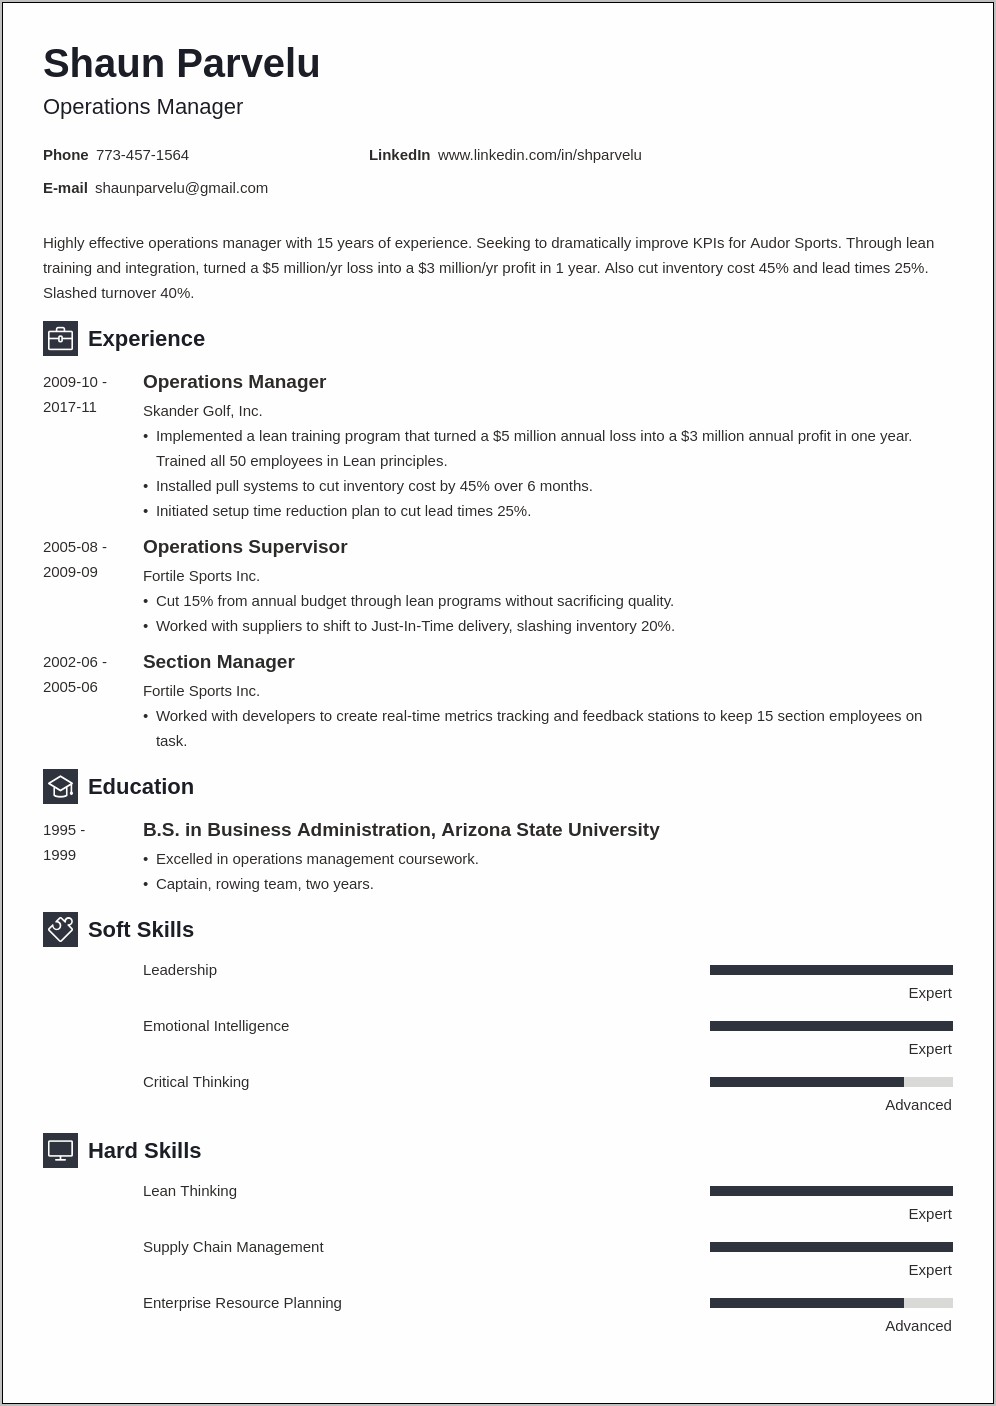 Resume Summary For Operations Manager